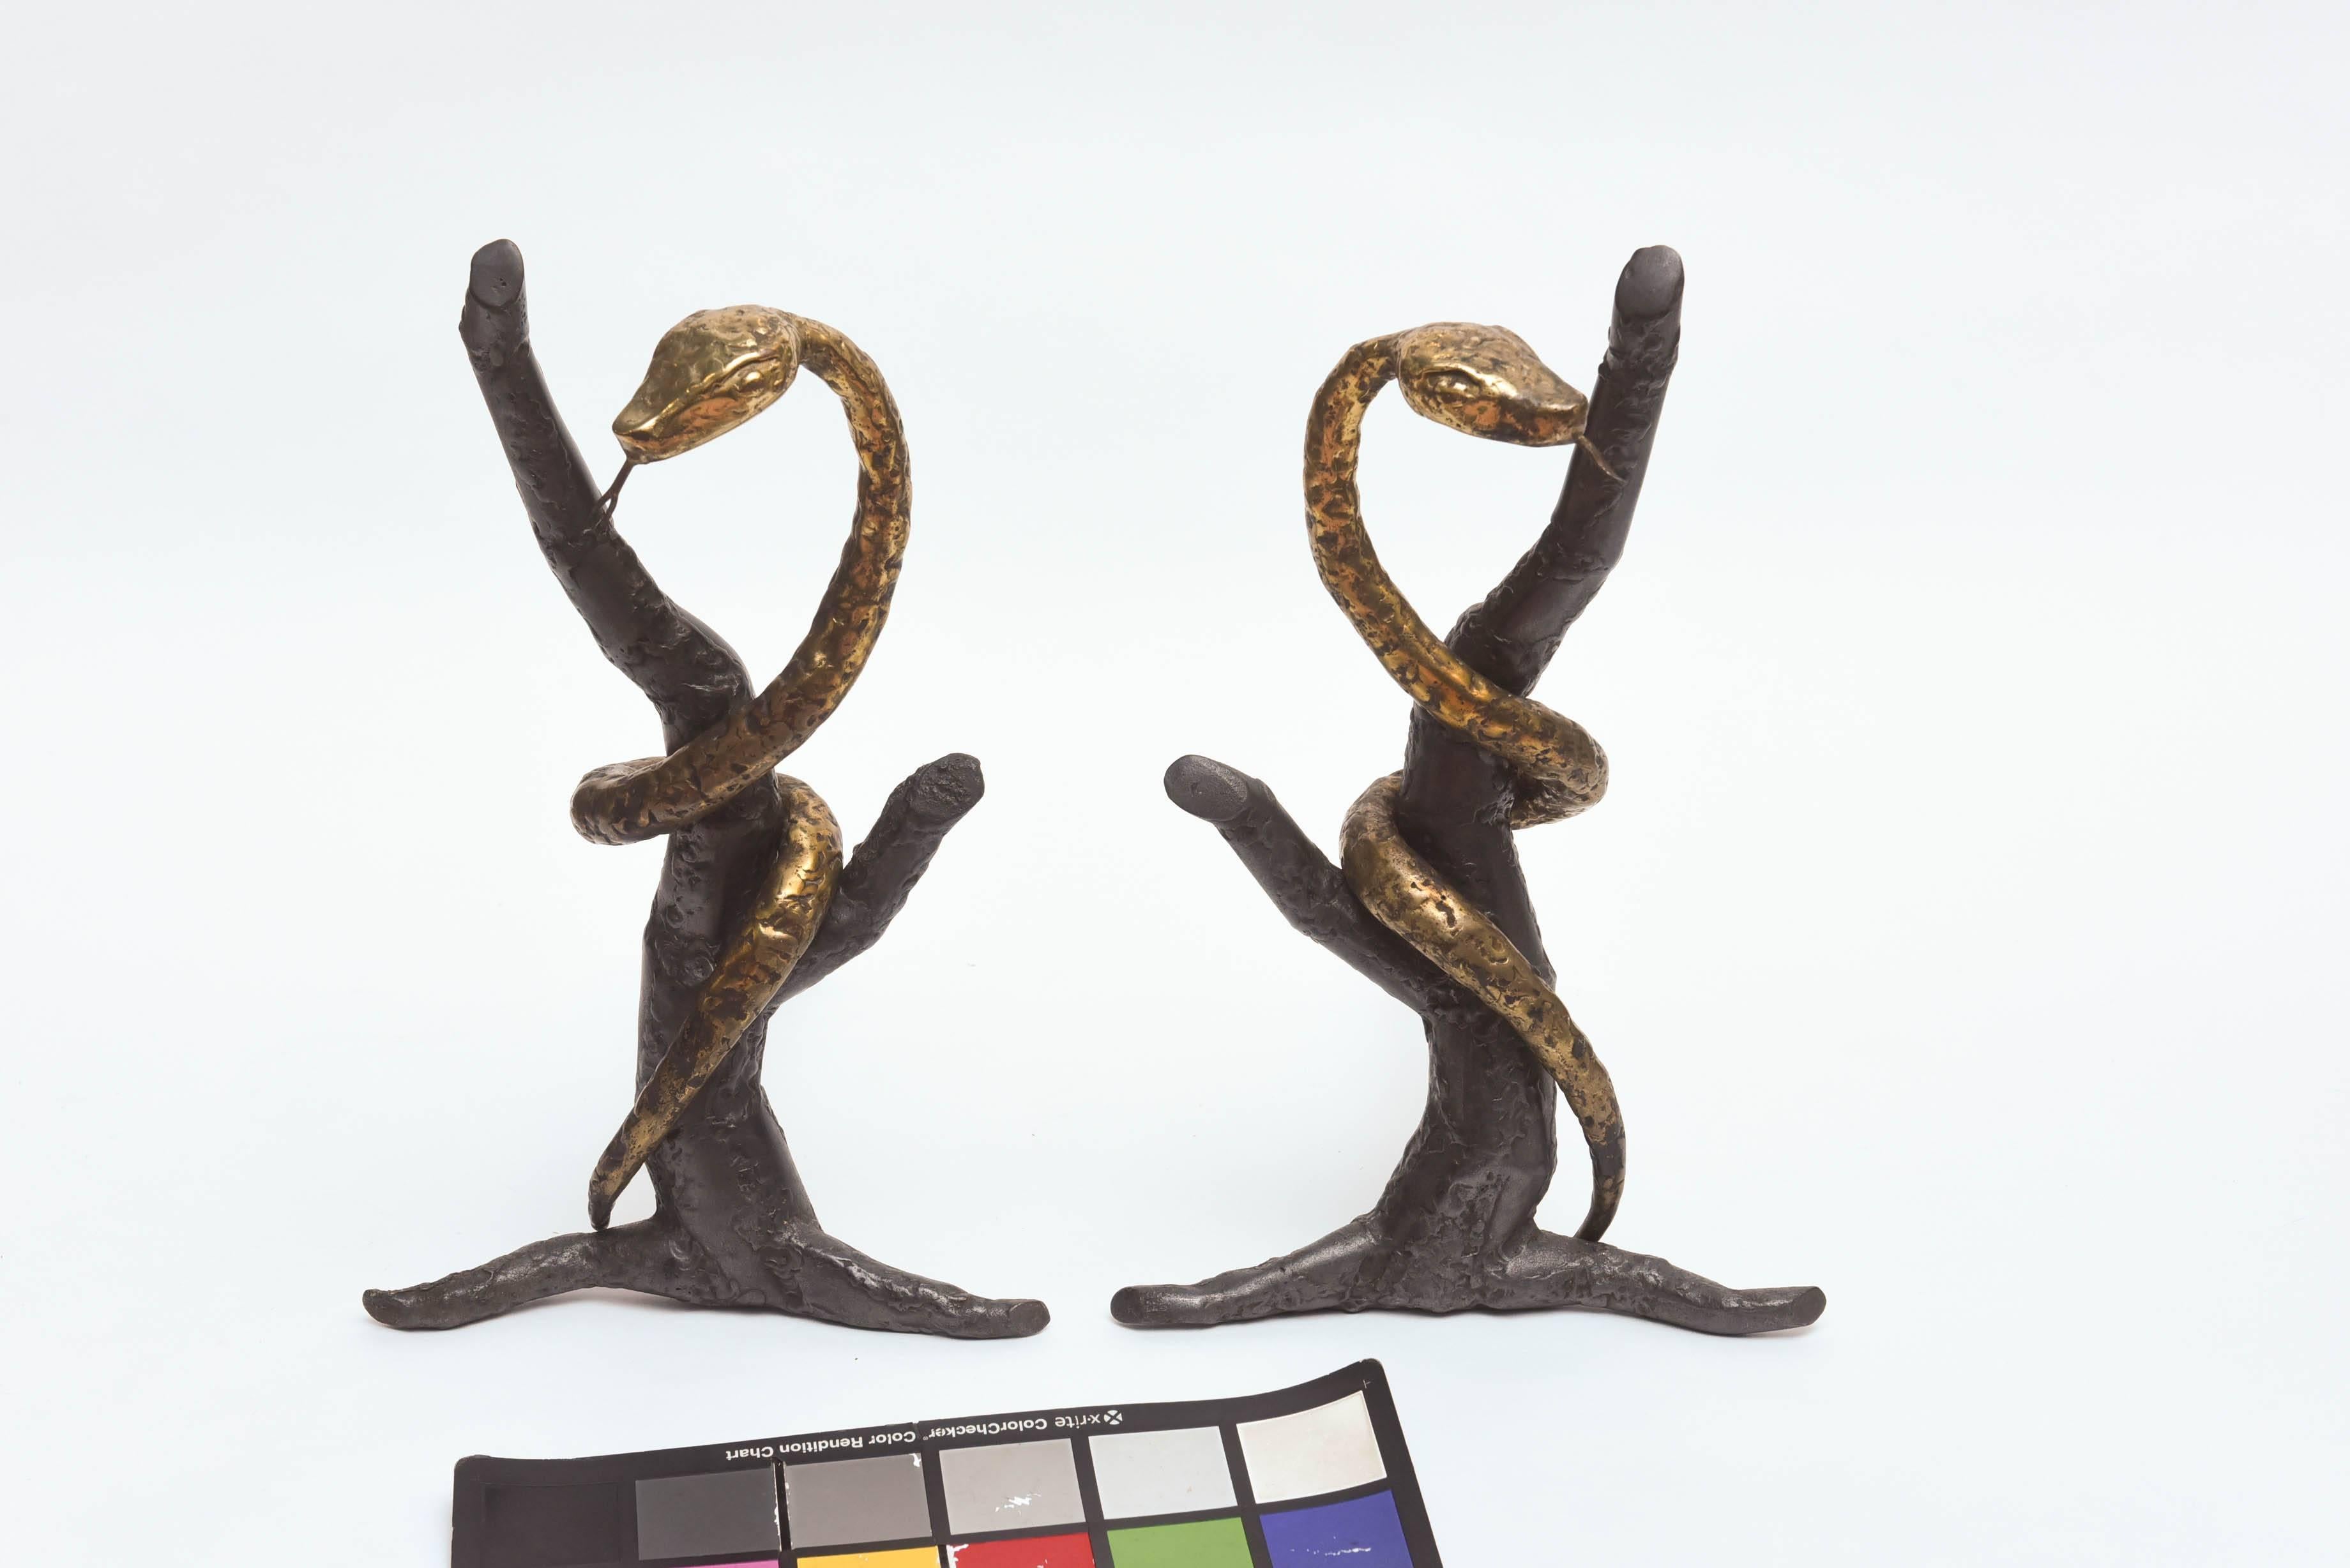 Most unusual. The brass snakes are detachable from the branch form iron stands.